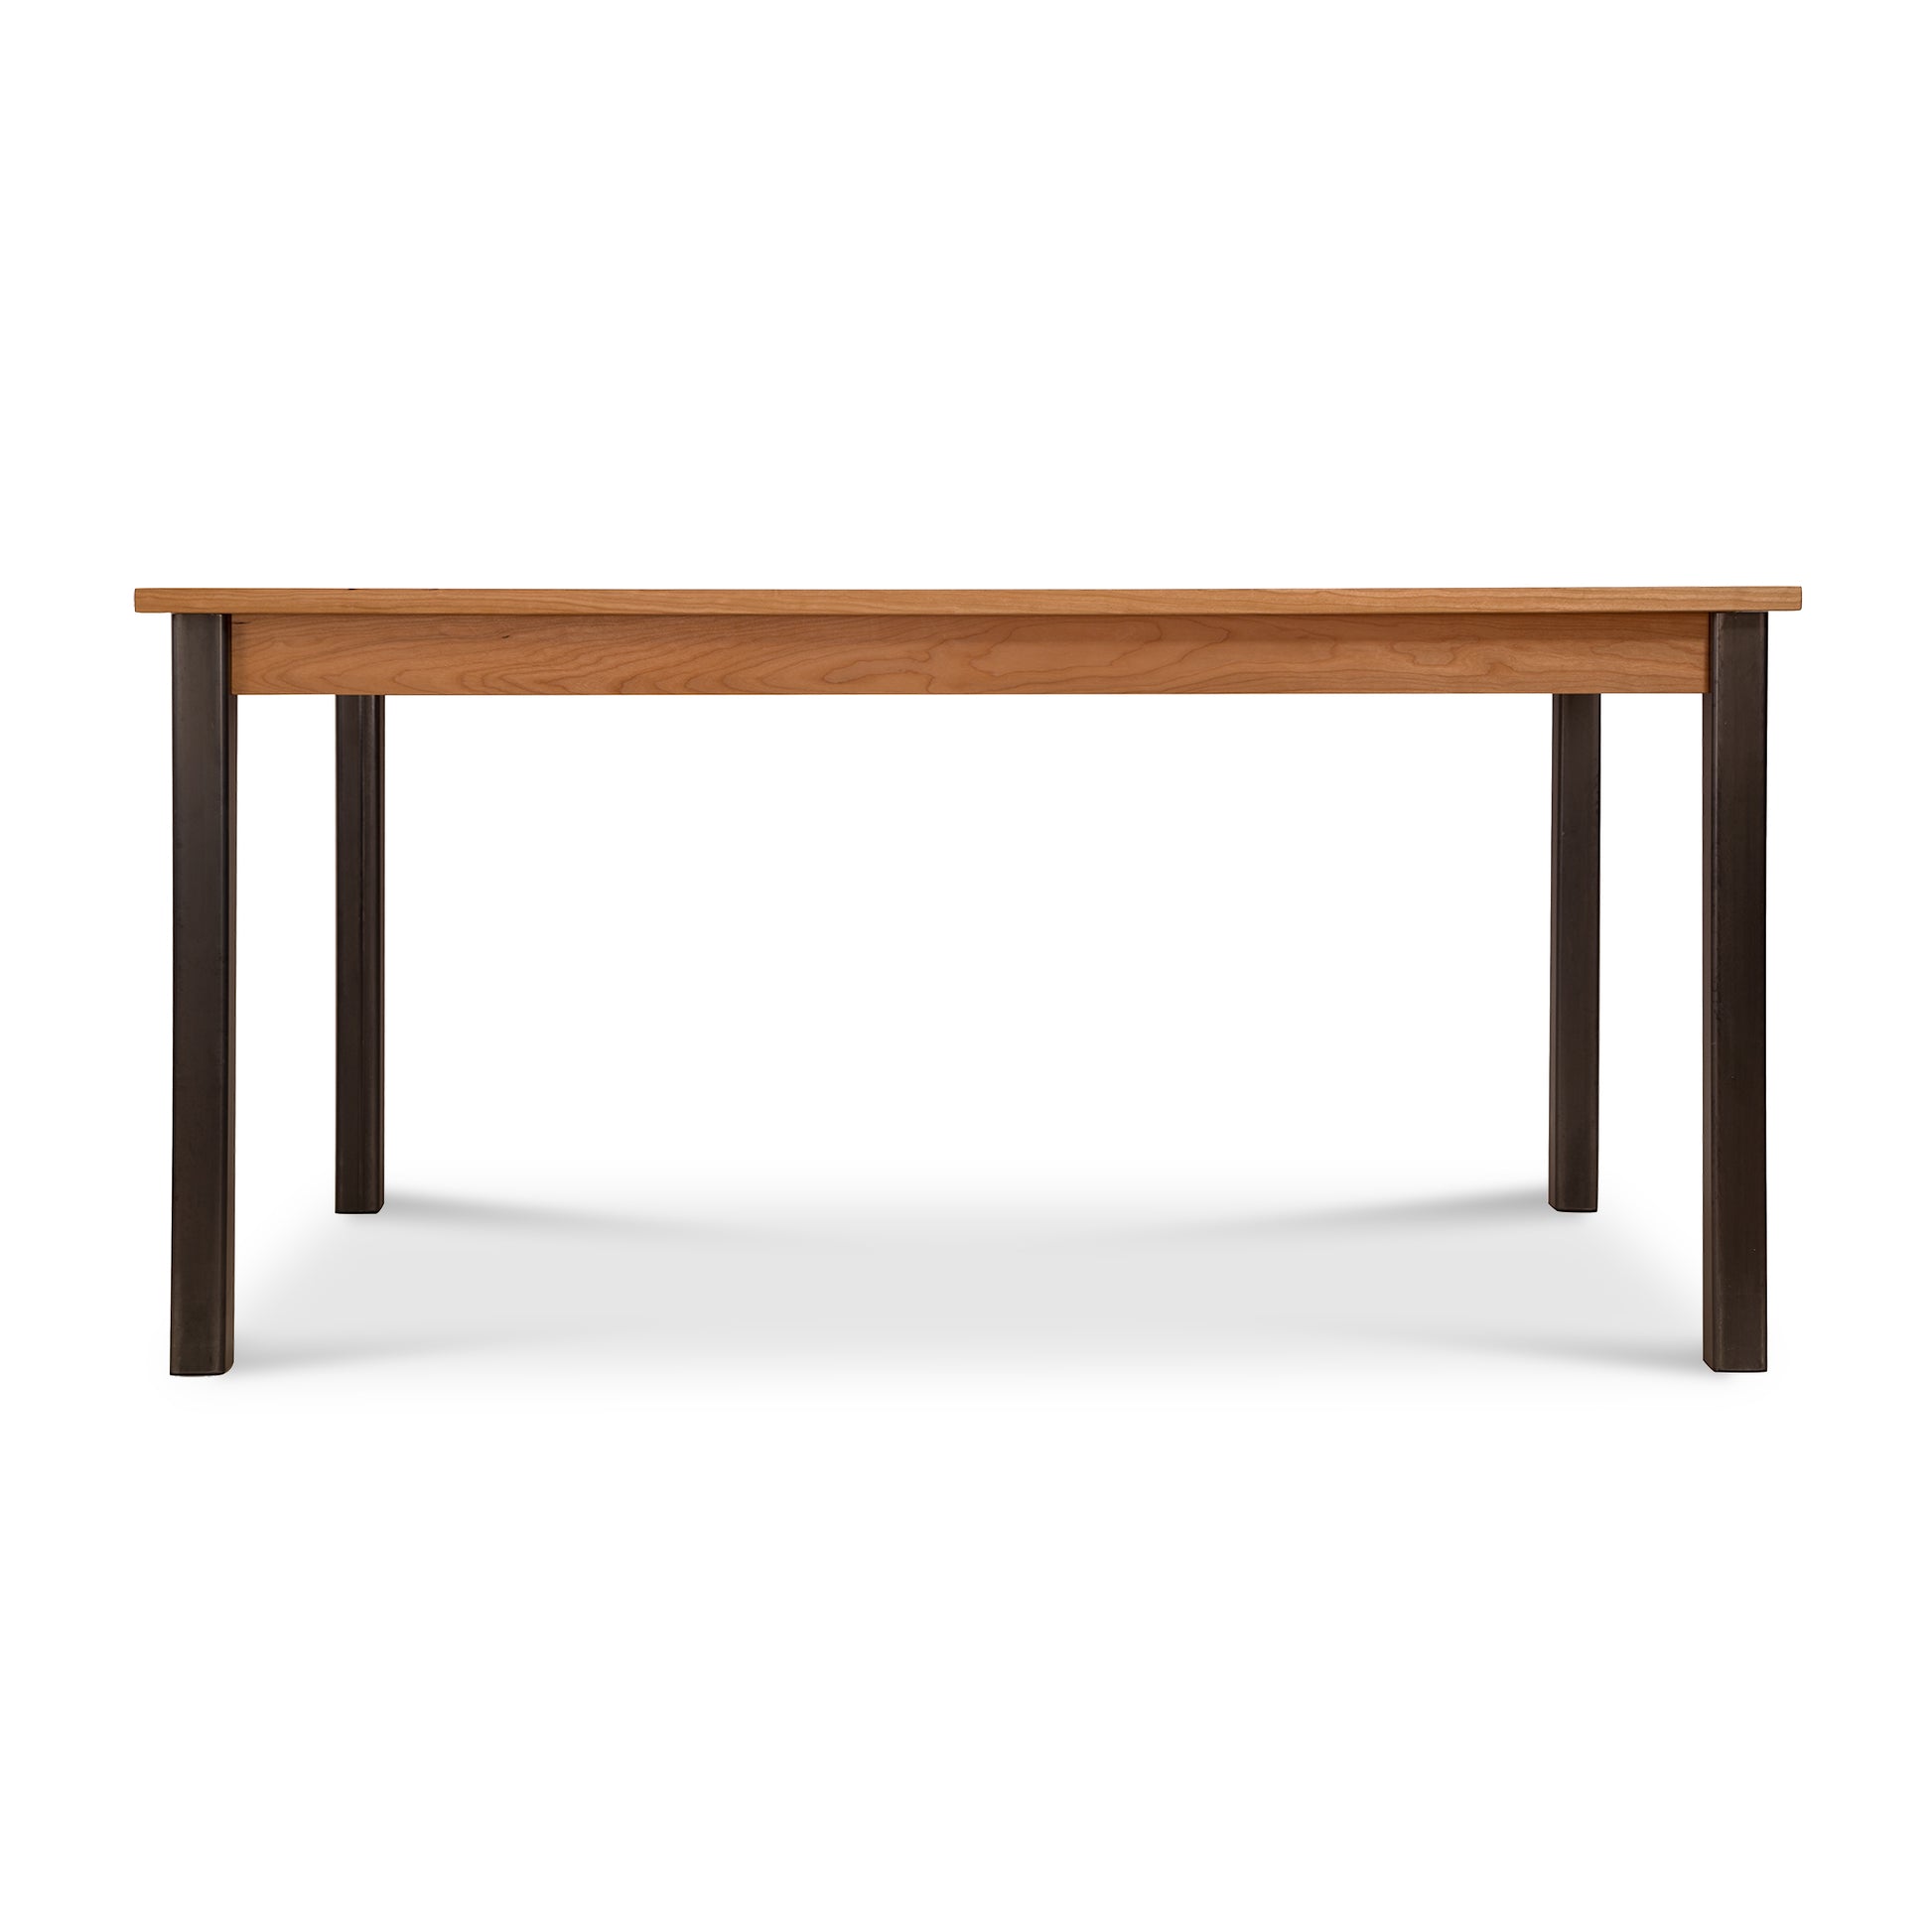 A Vermont Woods Studios Contemporary Farmhouse Table with black legs on a white background.